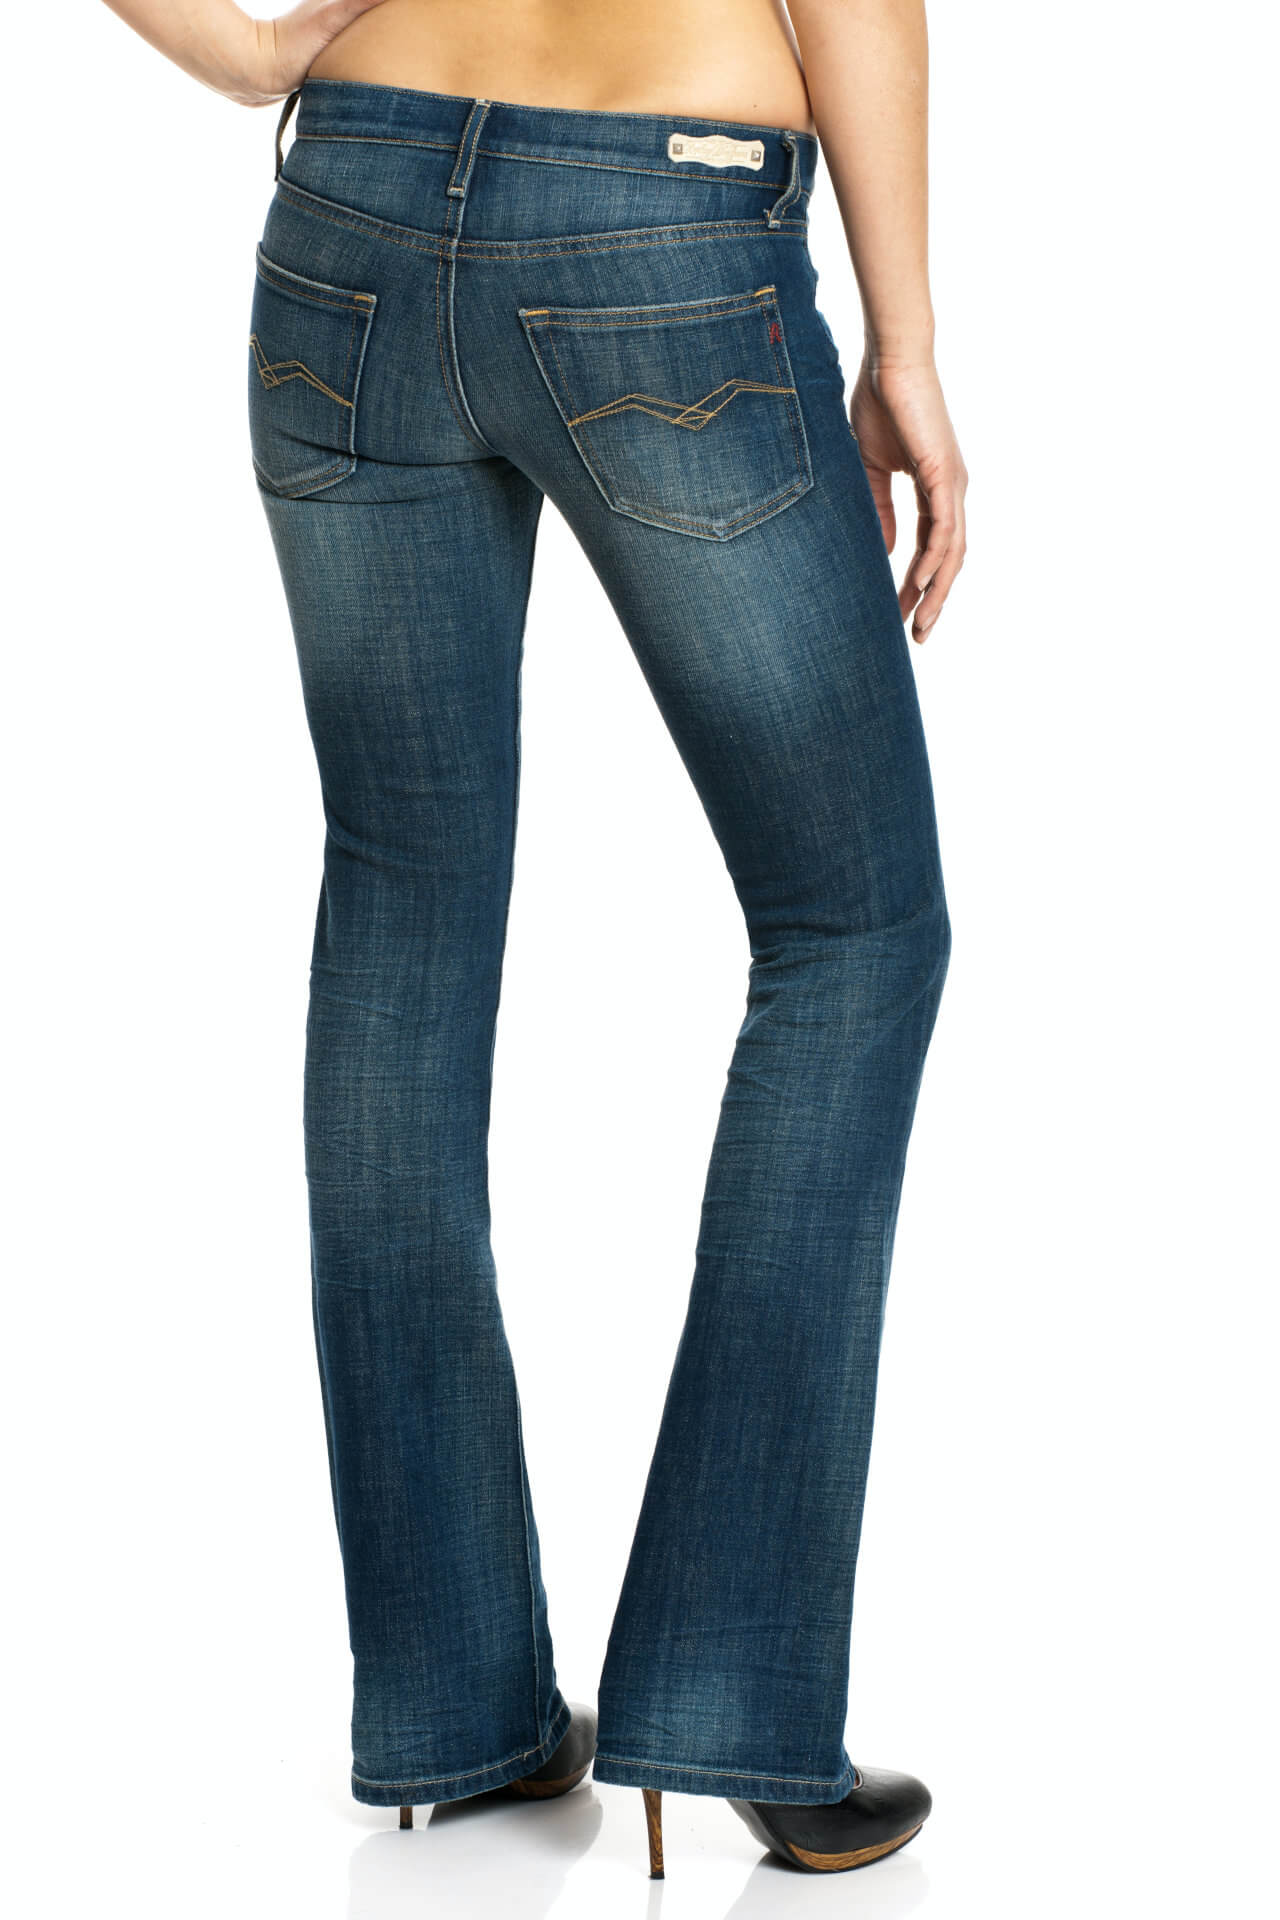 Replay Jeans Radell